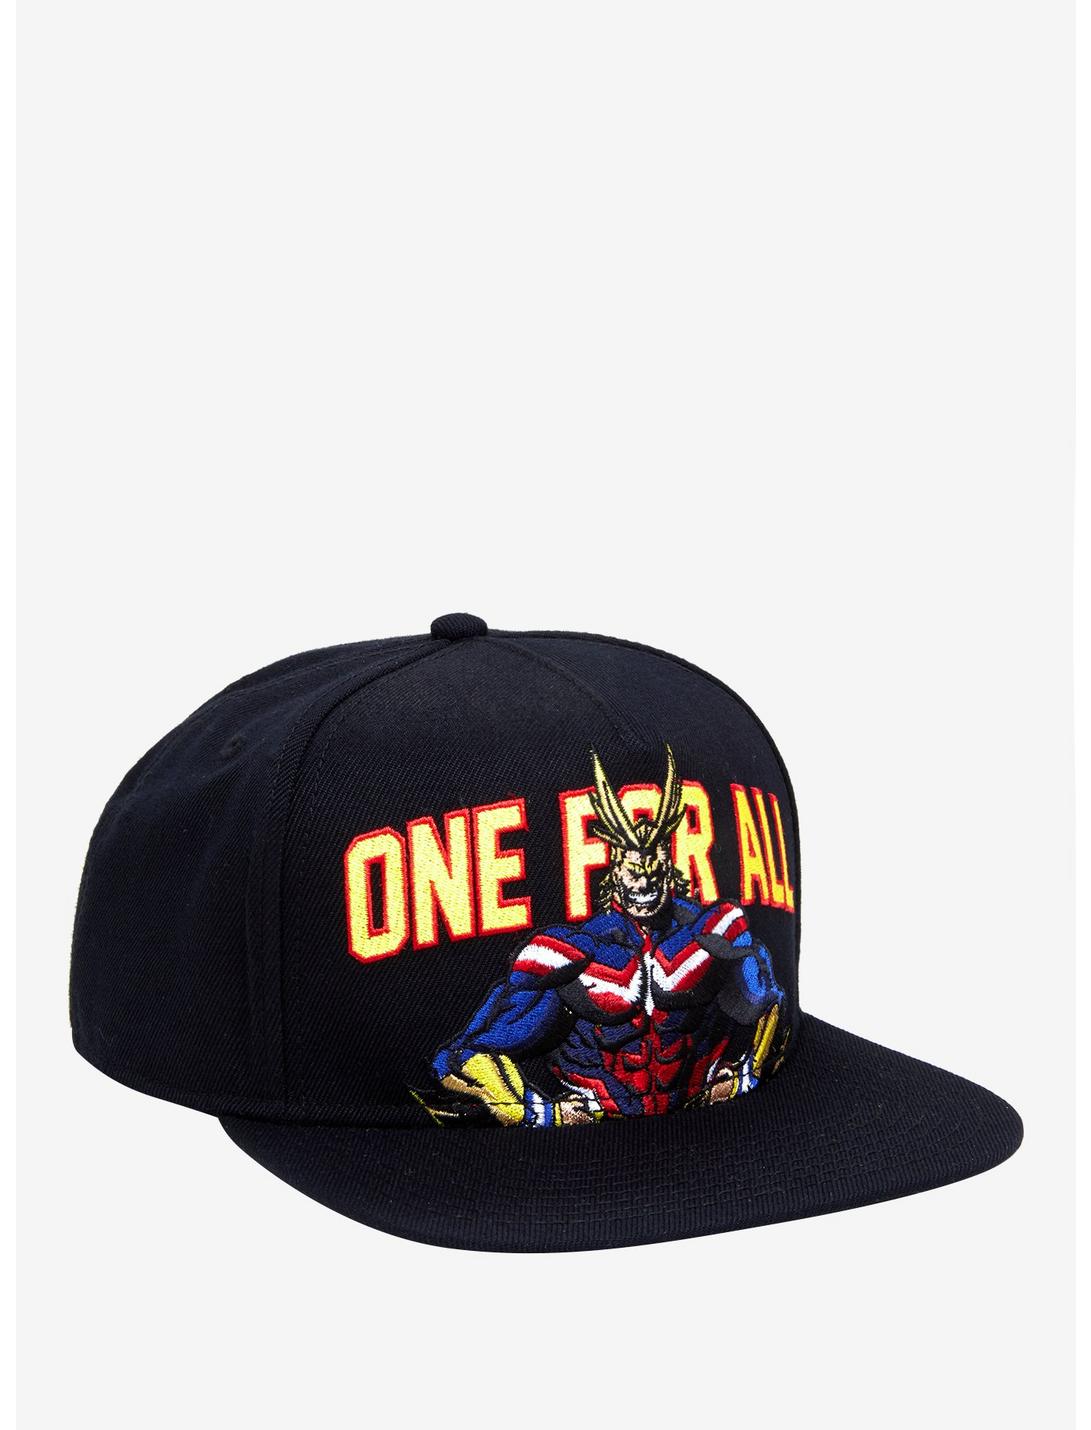 My Hero Academia One For All Snapback Hat | Hot Topic